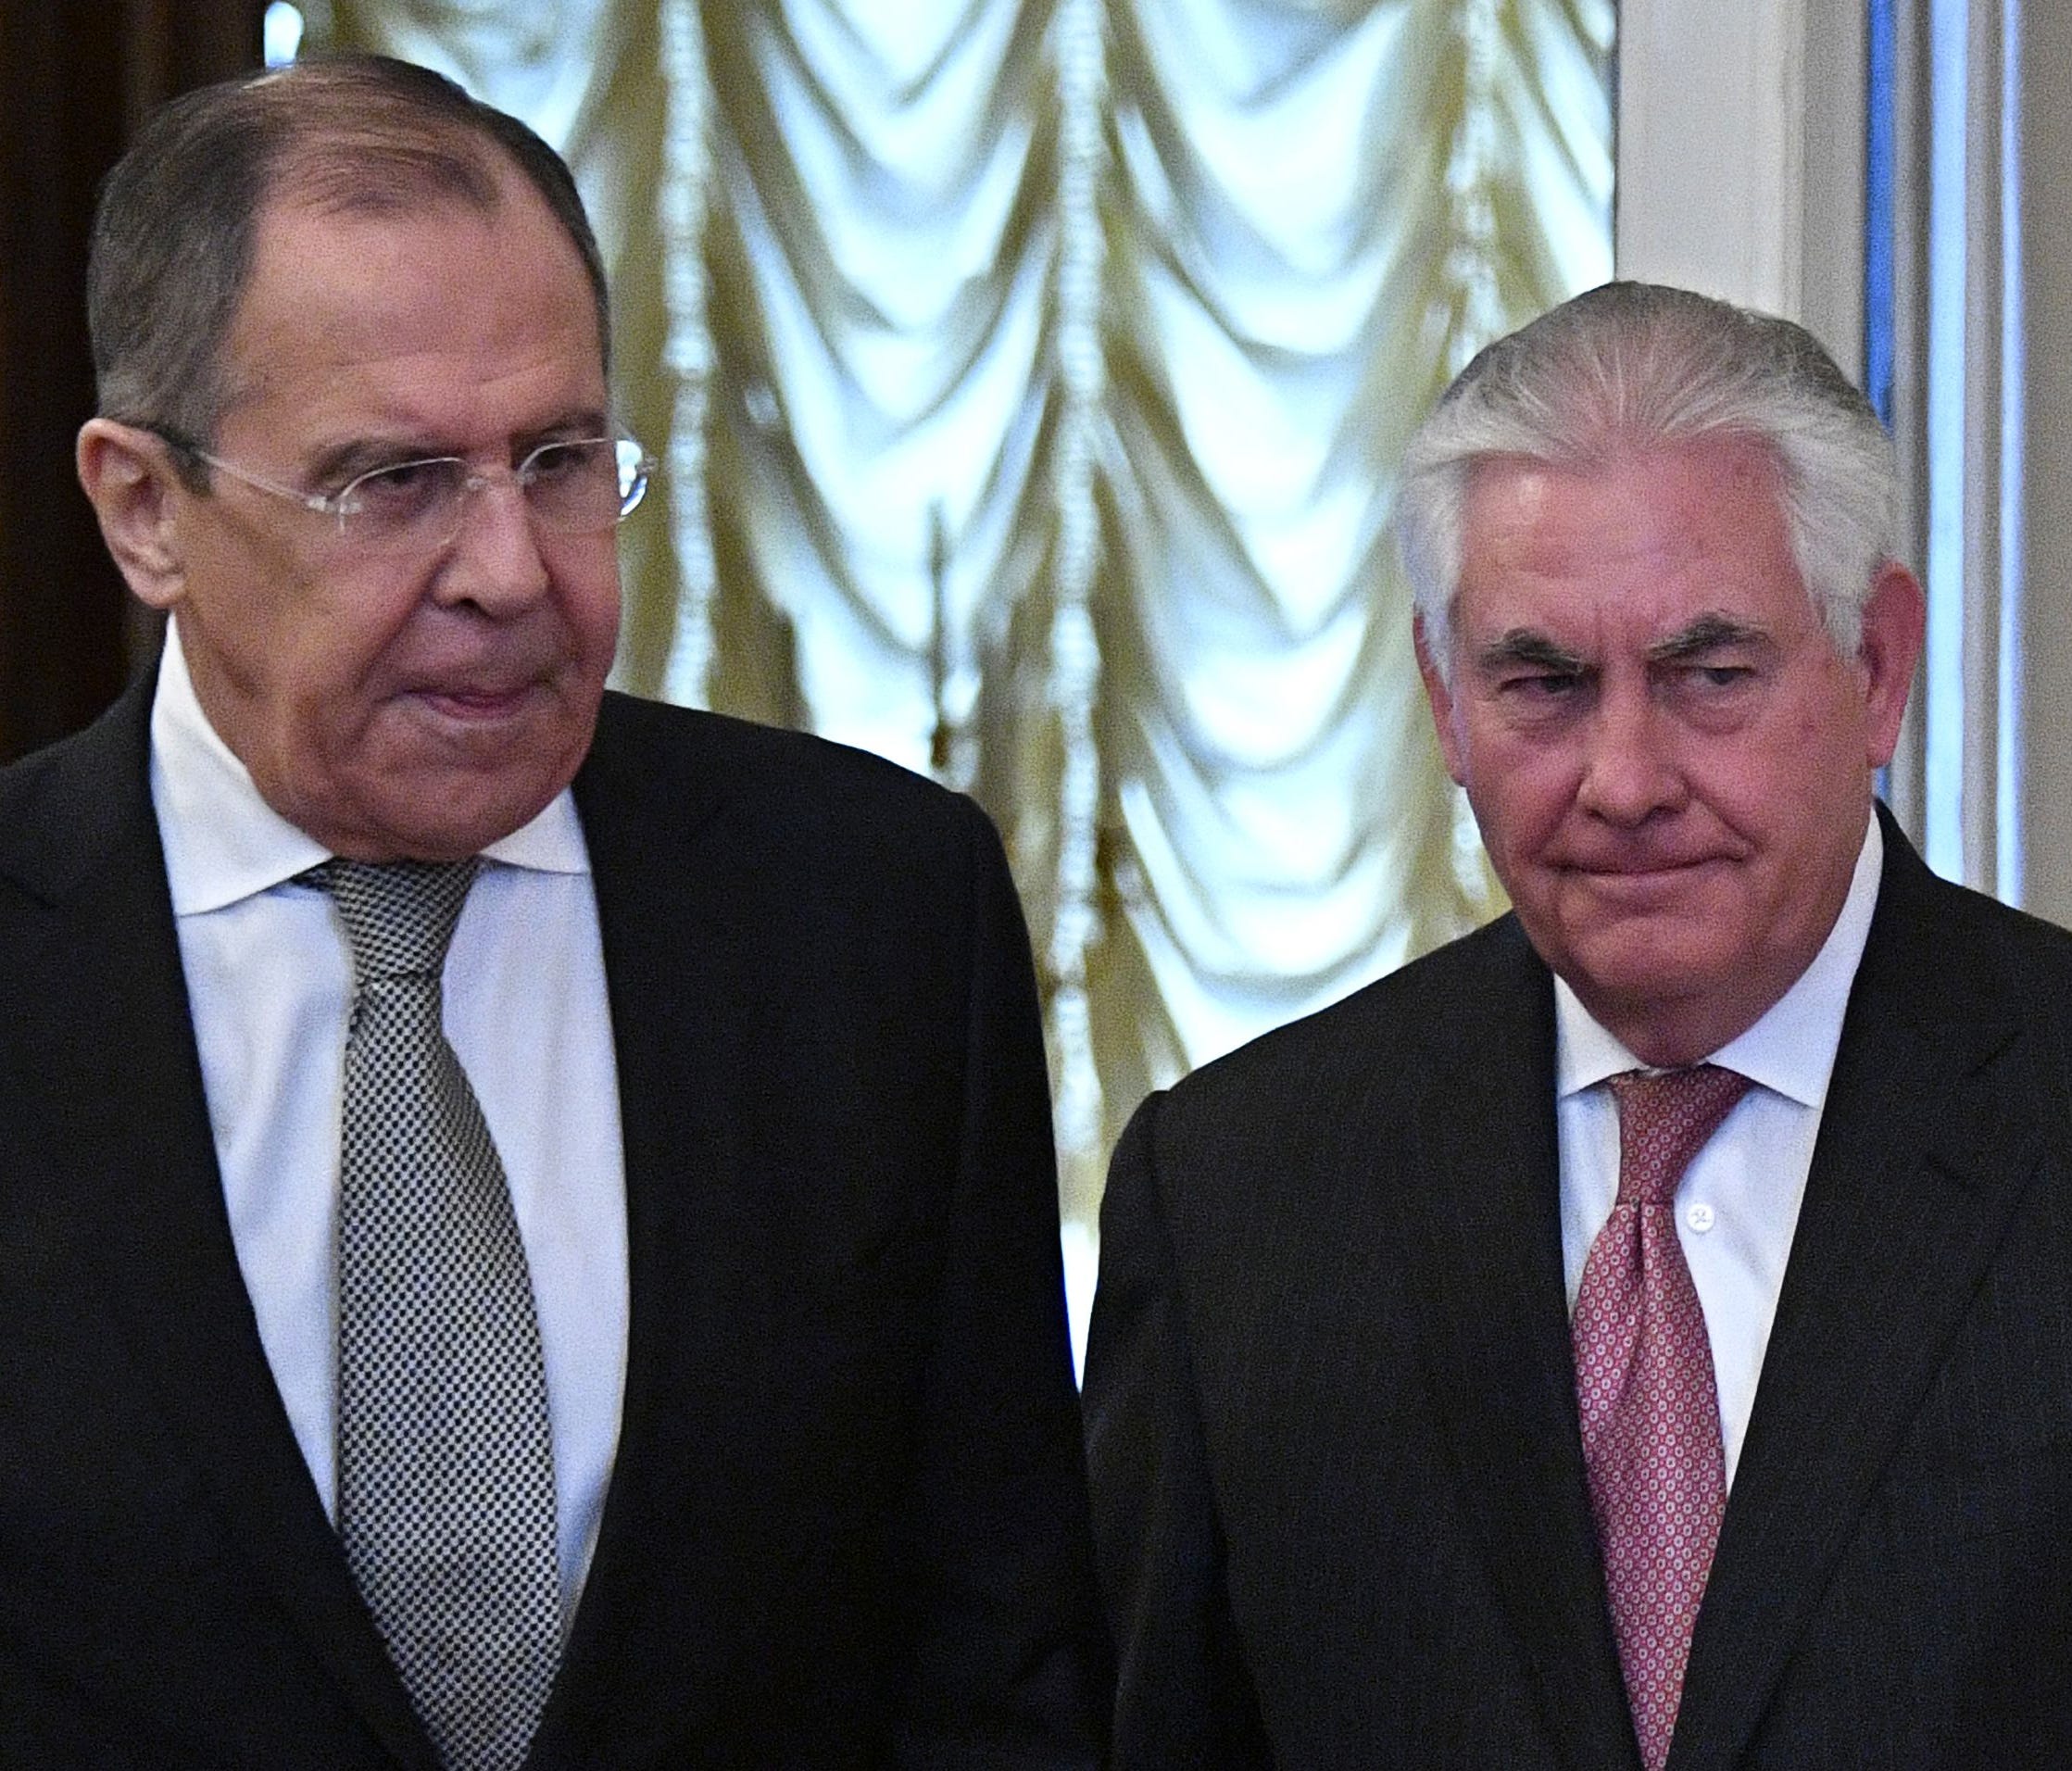 Russian Foreign Minister Sergei Lavrov and Secretary of State Rex Tillerson enter a hall during a meeting in Moscow on April 12, 2017.